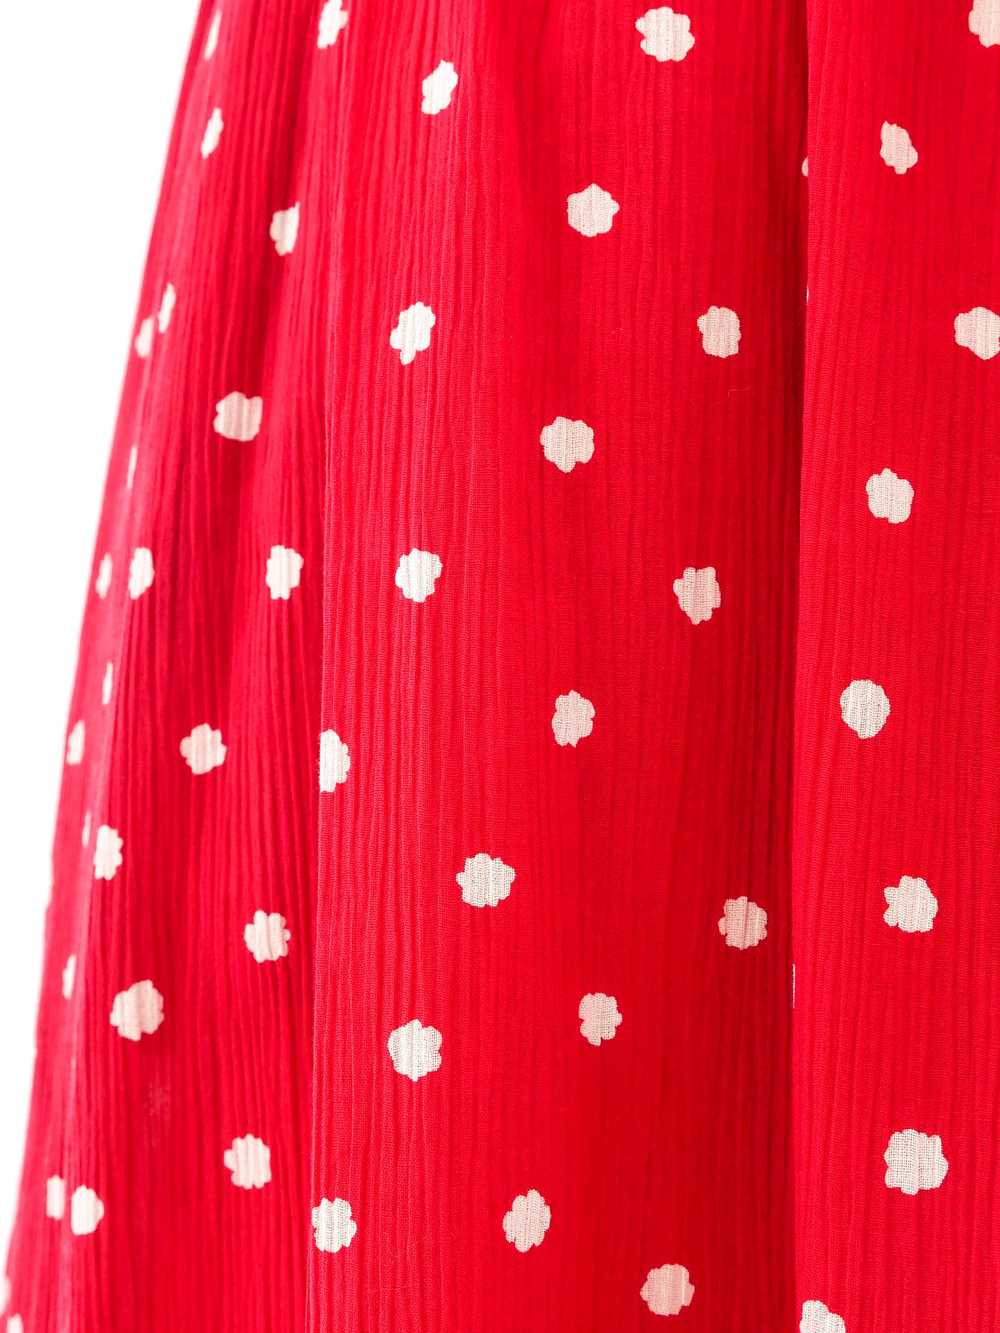 Jean Patou Dotted Red Dress - image 5